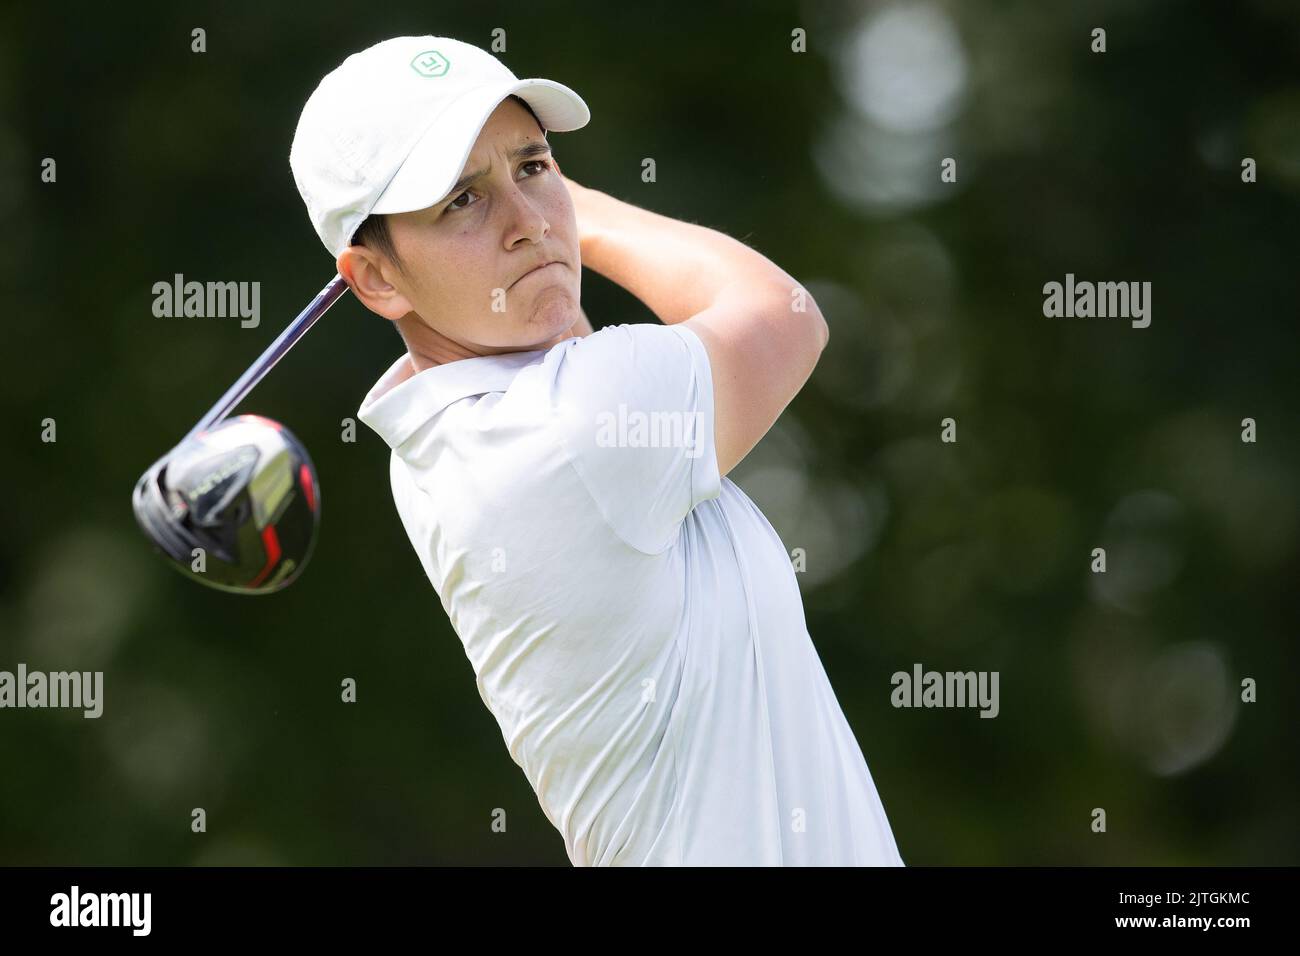 August 25, 2022: Dewi Weber of the Netherlands tees off at the first hole  during opening round of the CP Womens Open held at Ottawa Hunt & Golf Club  in Ottawa, Canada.